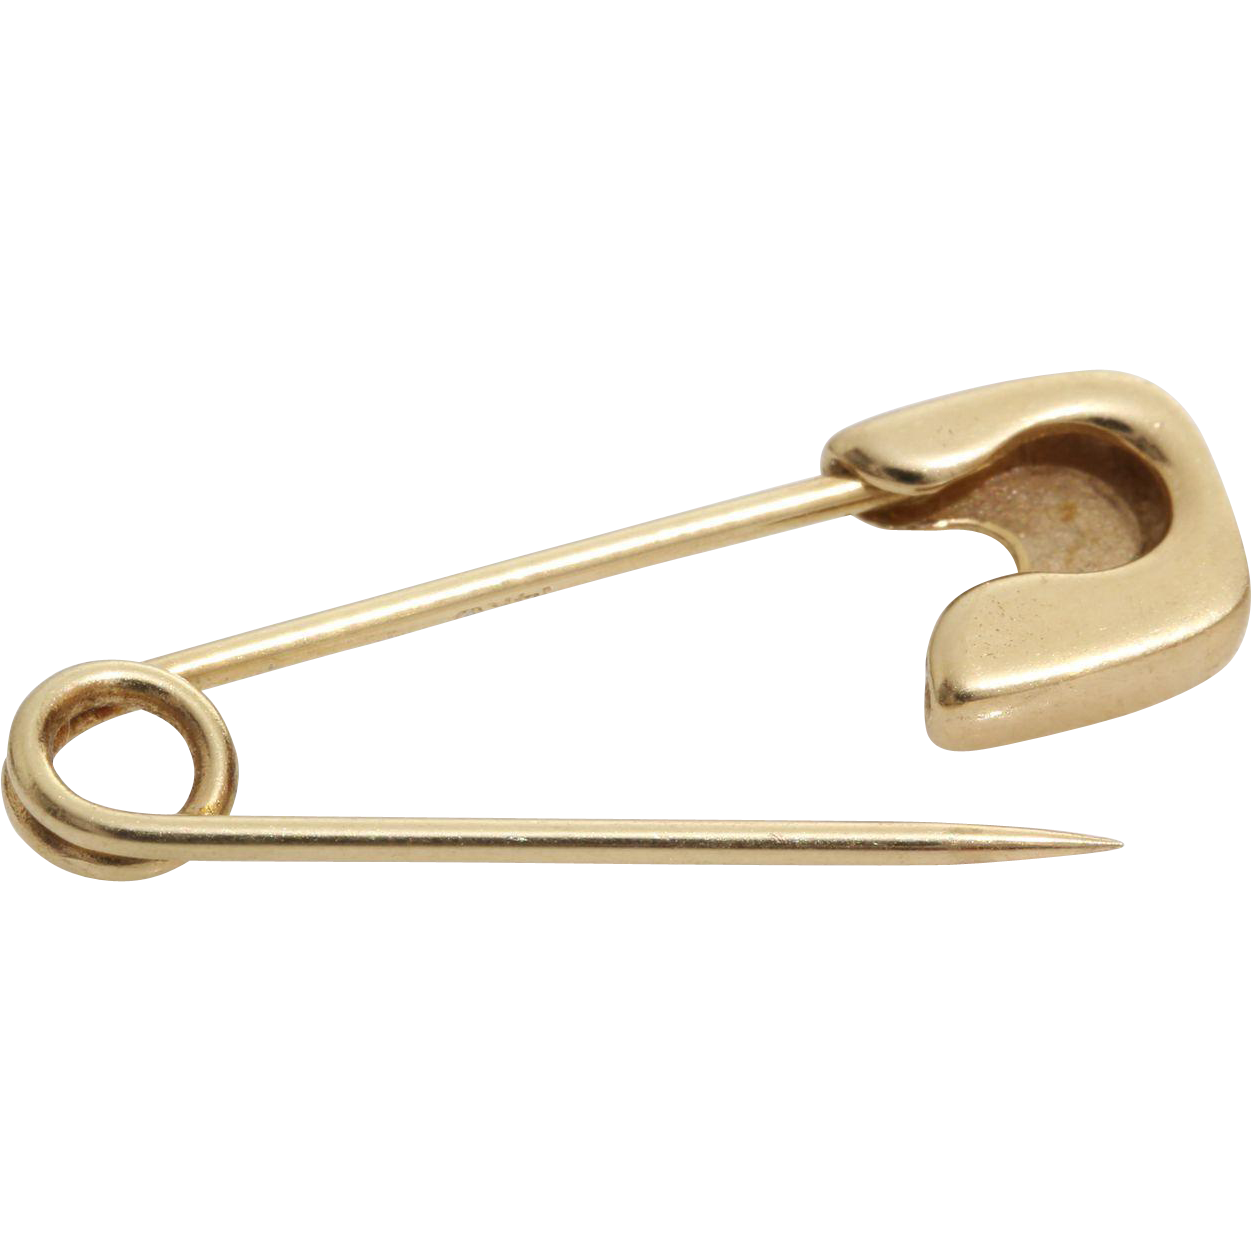 Golden Safety Pin PNG High-Quality Image